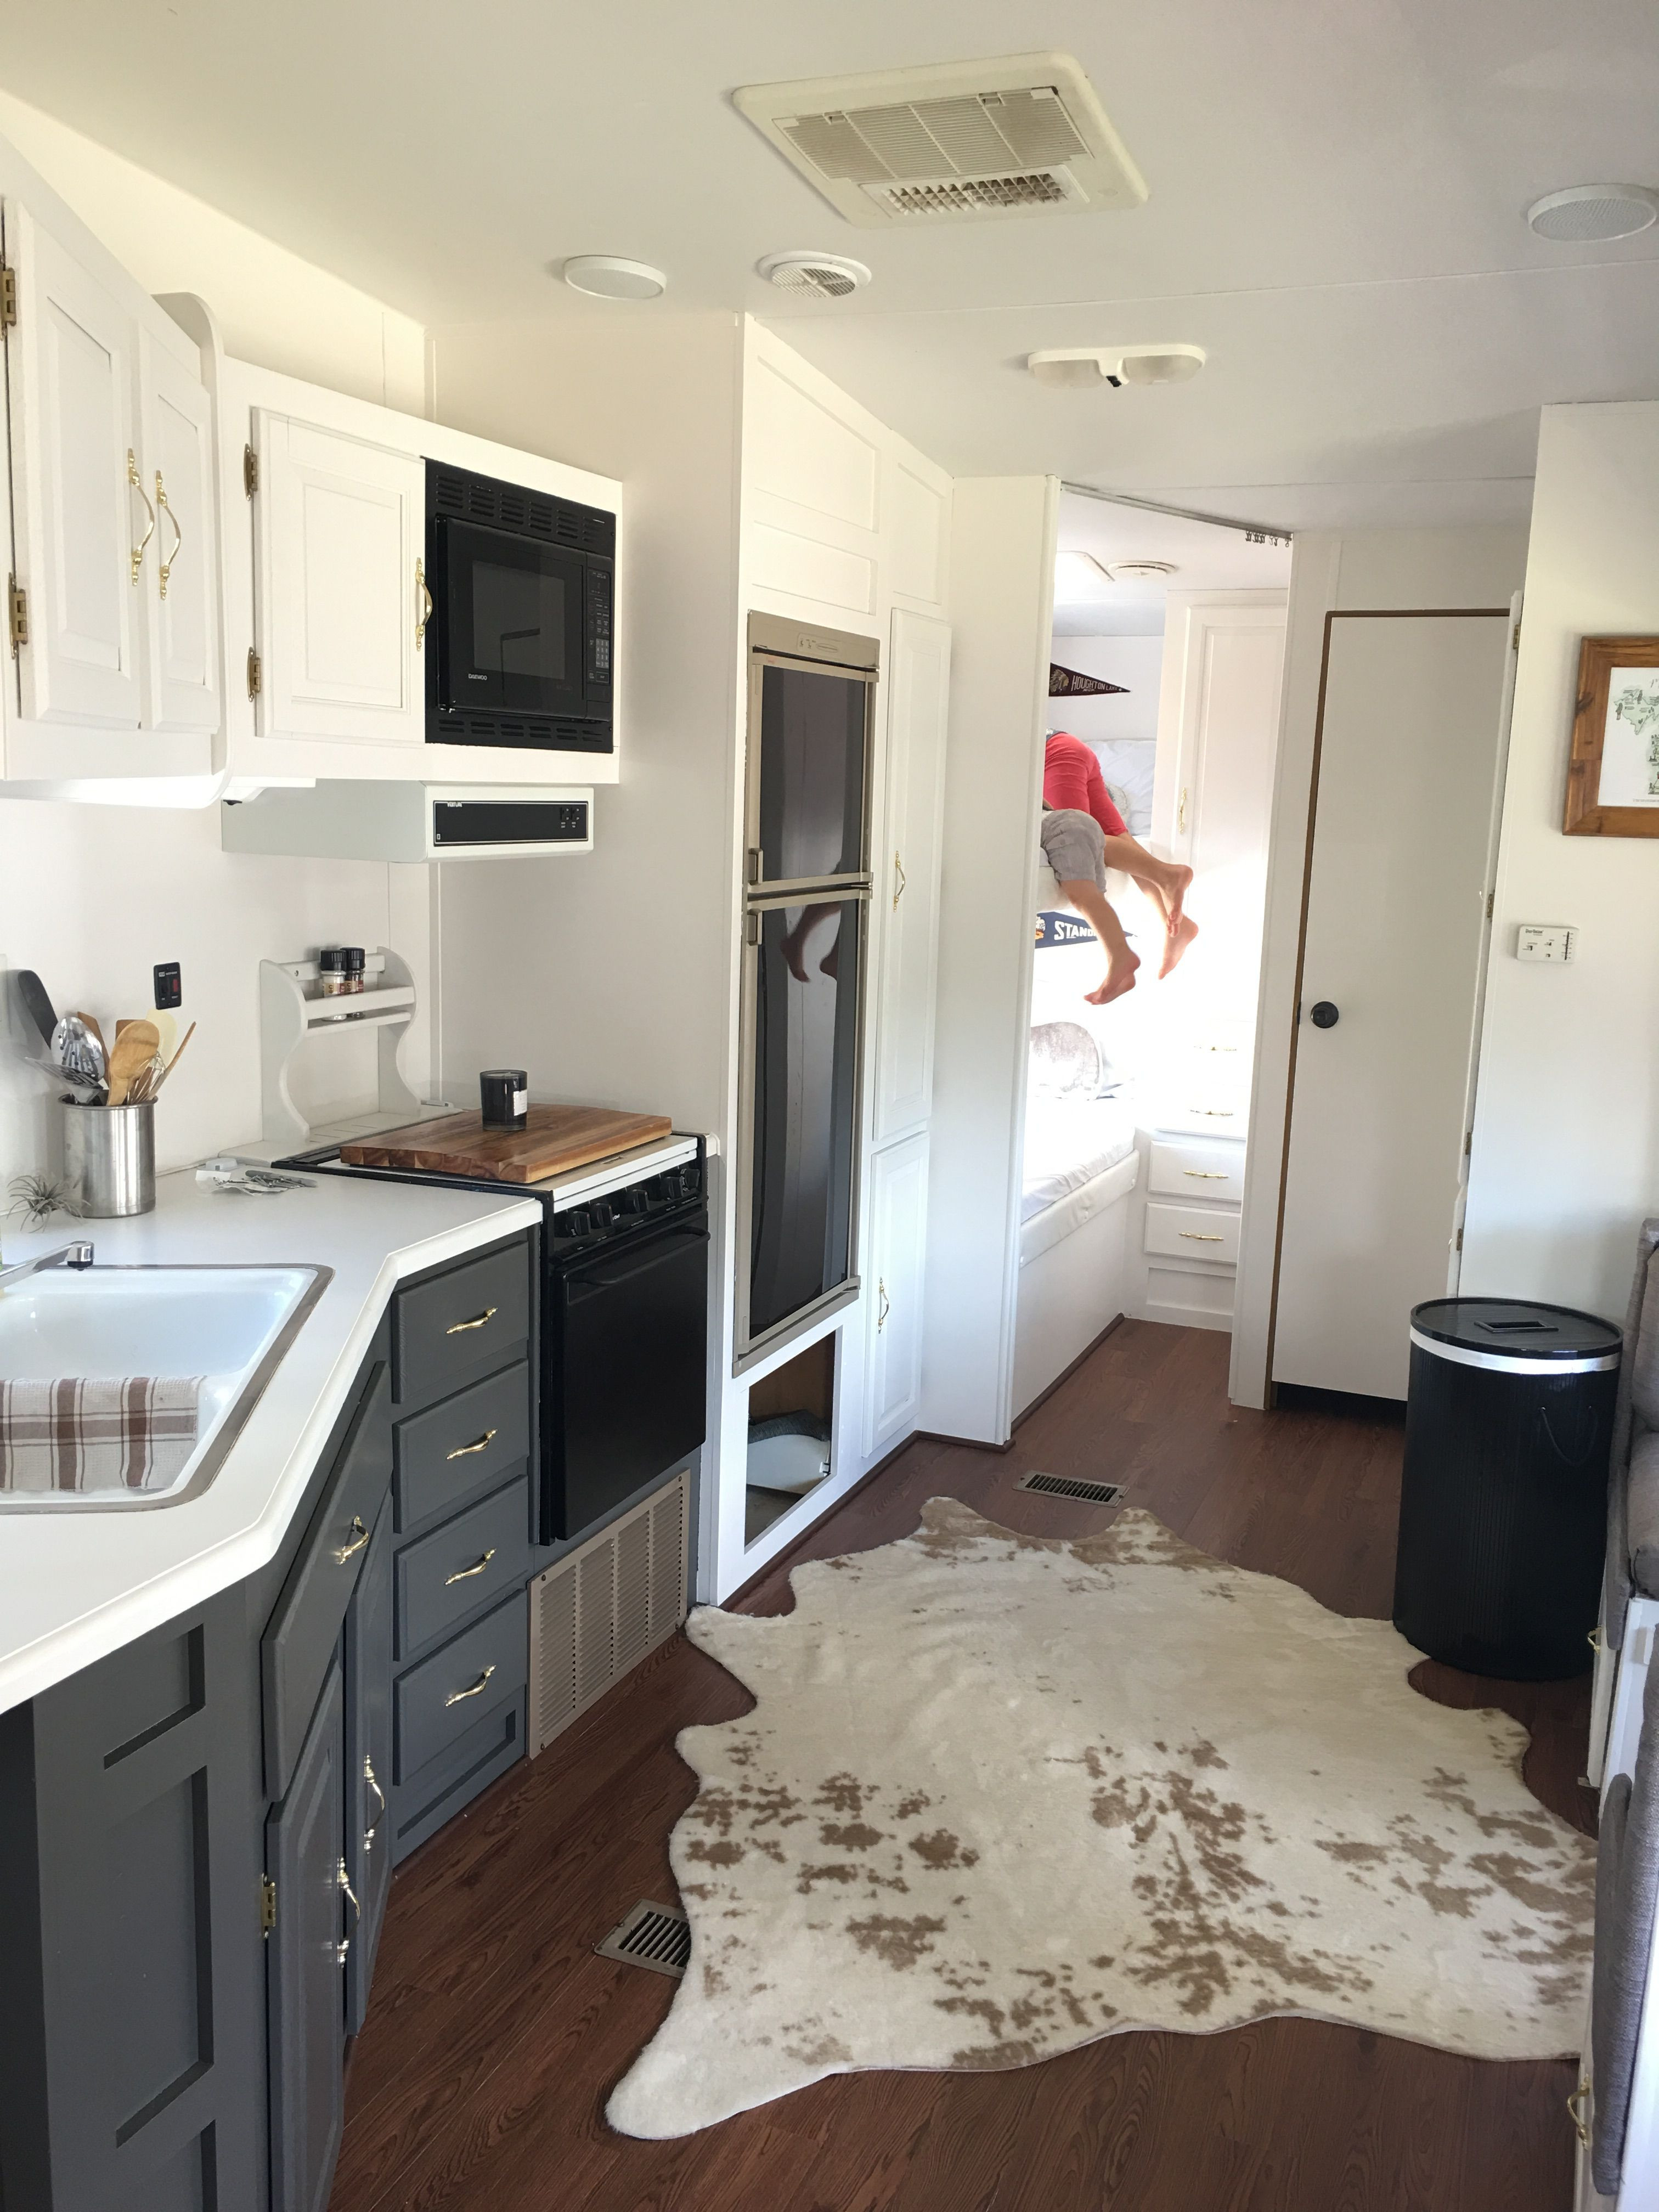 Best ideas about Small Travel Trailers With Bathroom . Save or Pin Awesome Small Travel Trailers with Bathroom Now.